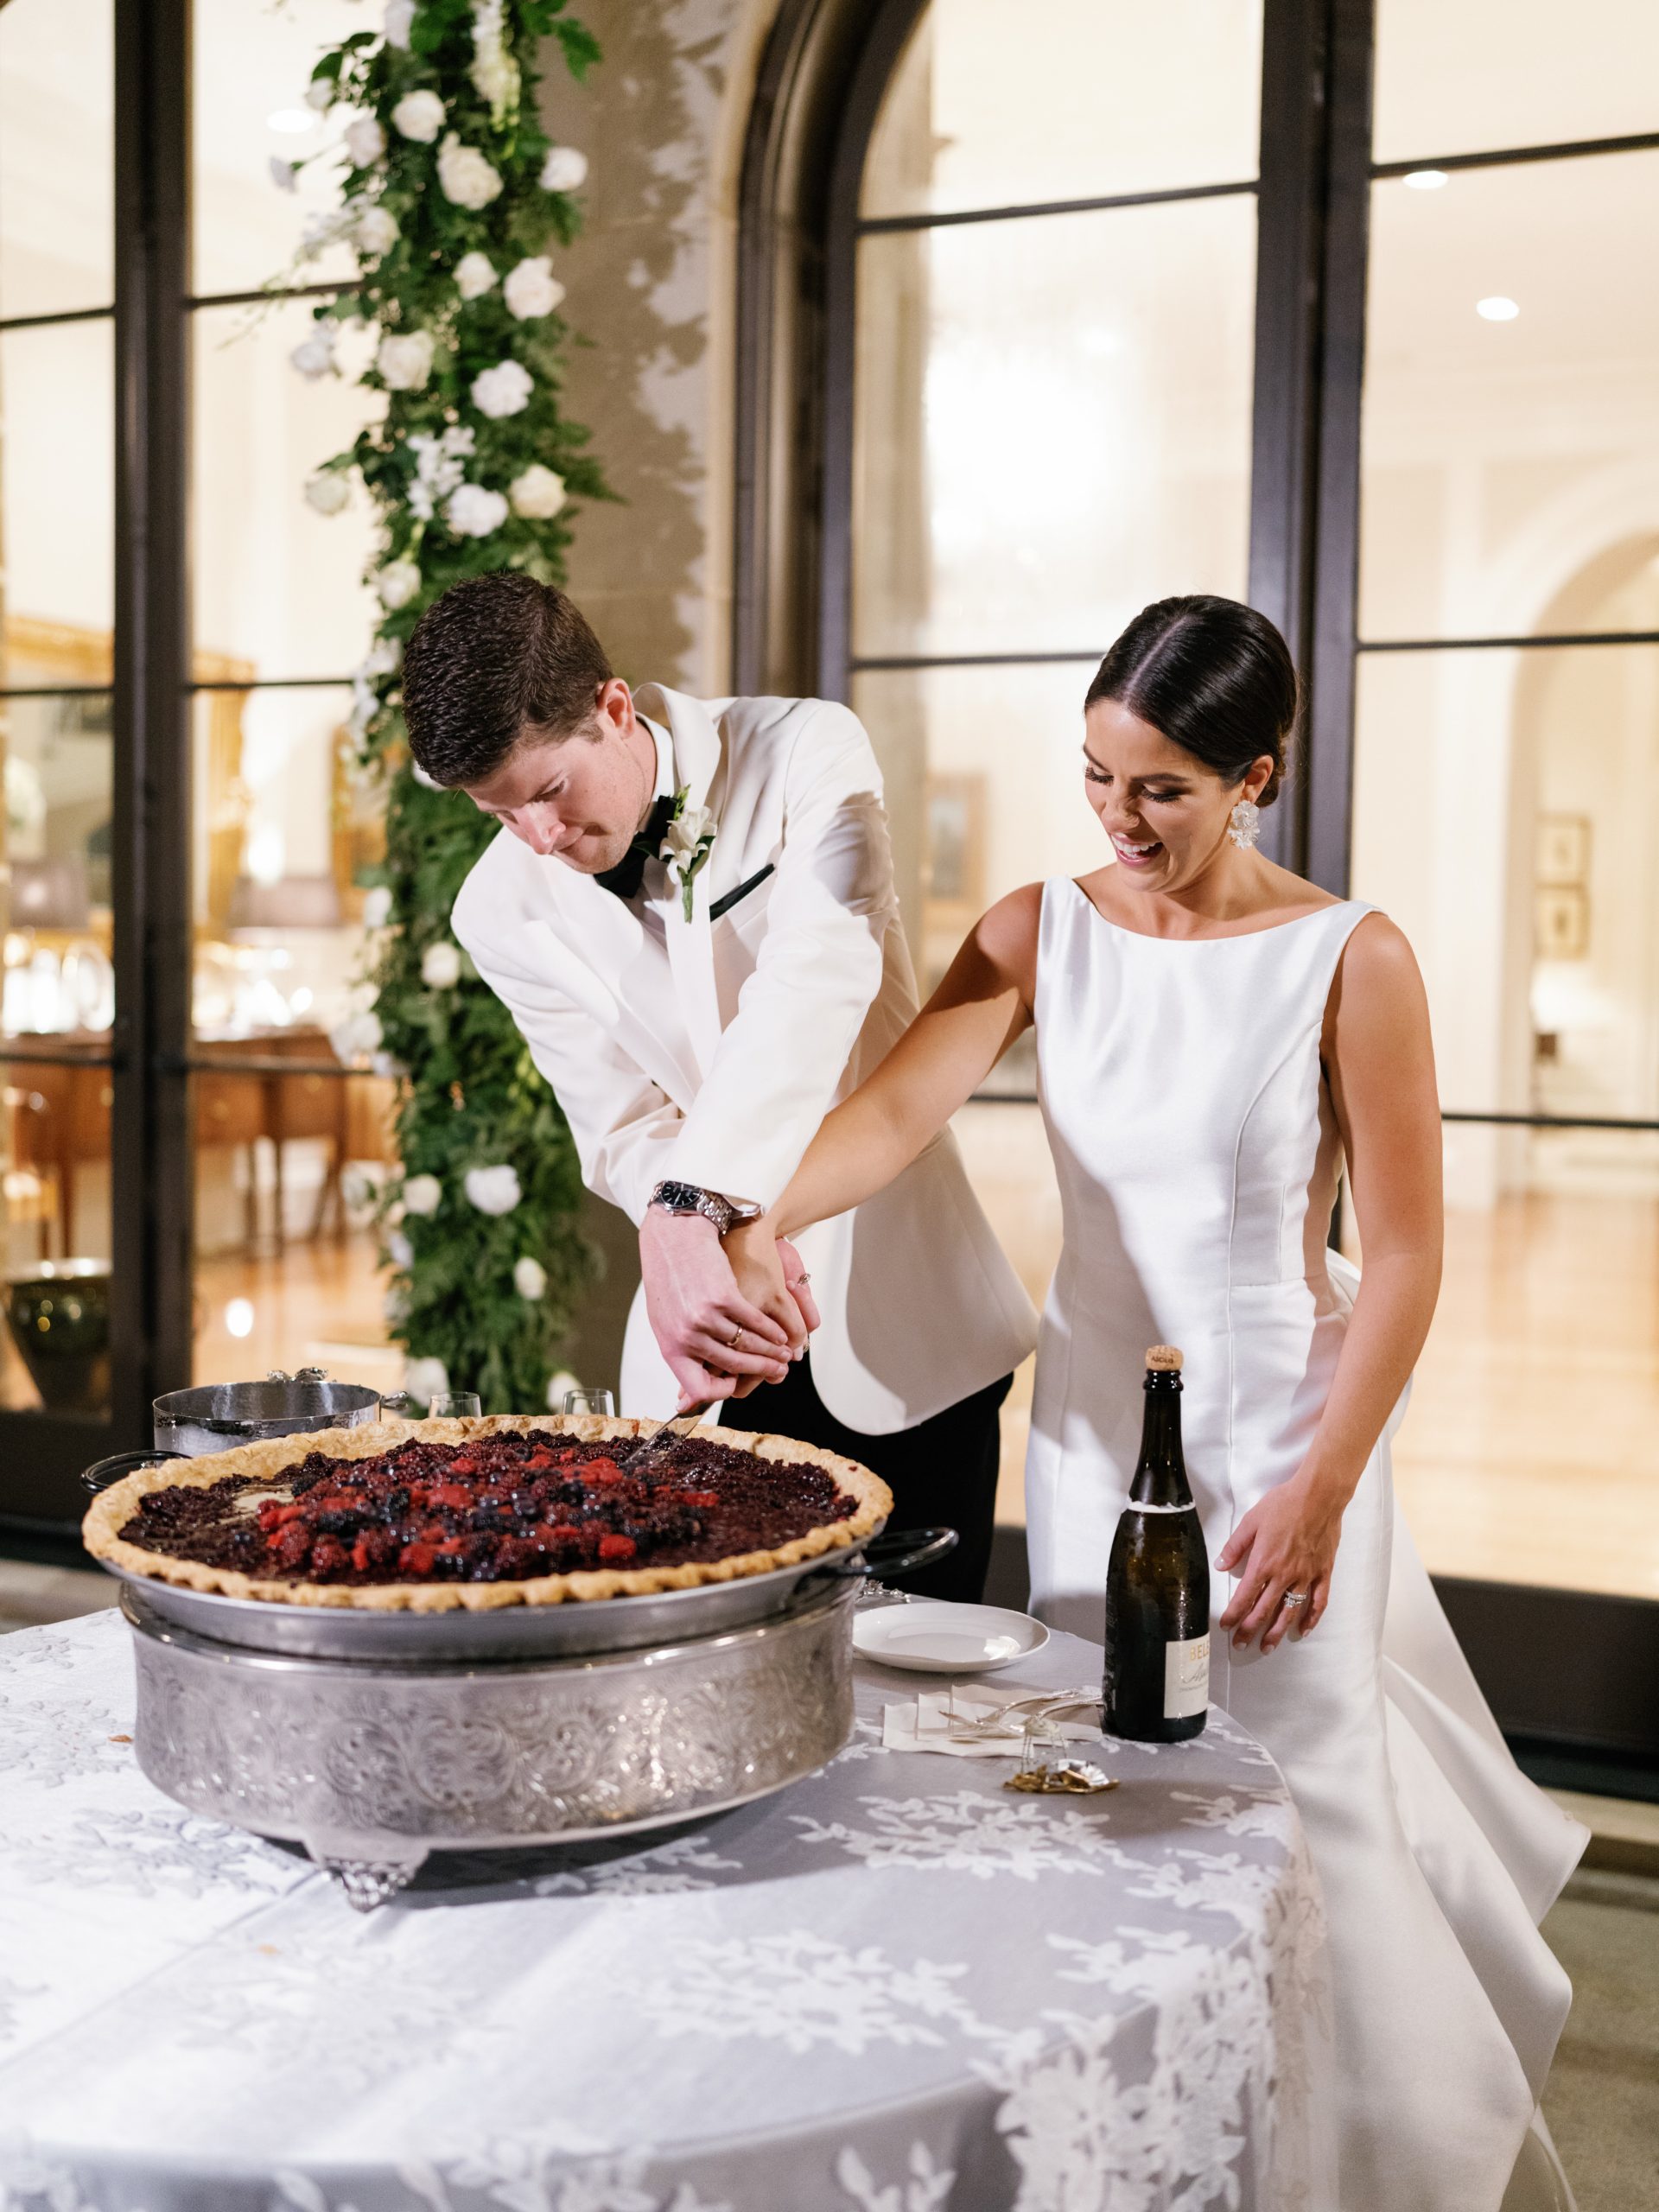 Jordan loves pie and was inspired by a friend in New York who had served a fruit tart at her wedding in Tuscany. Ally & Eloise Bakeshop made a spectacular berry tart in lieu of a wedding cake with additional options of coconut, key lime, and strawberry-rhubarb pies for the reception. 
